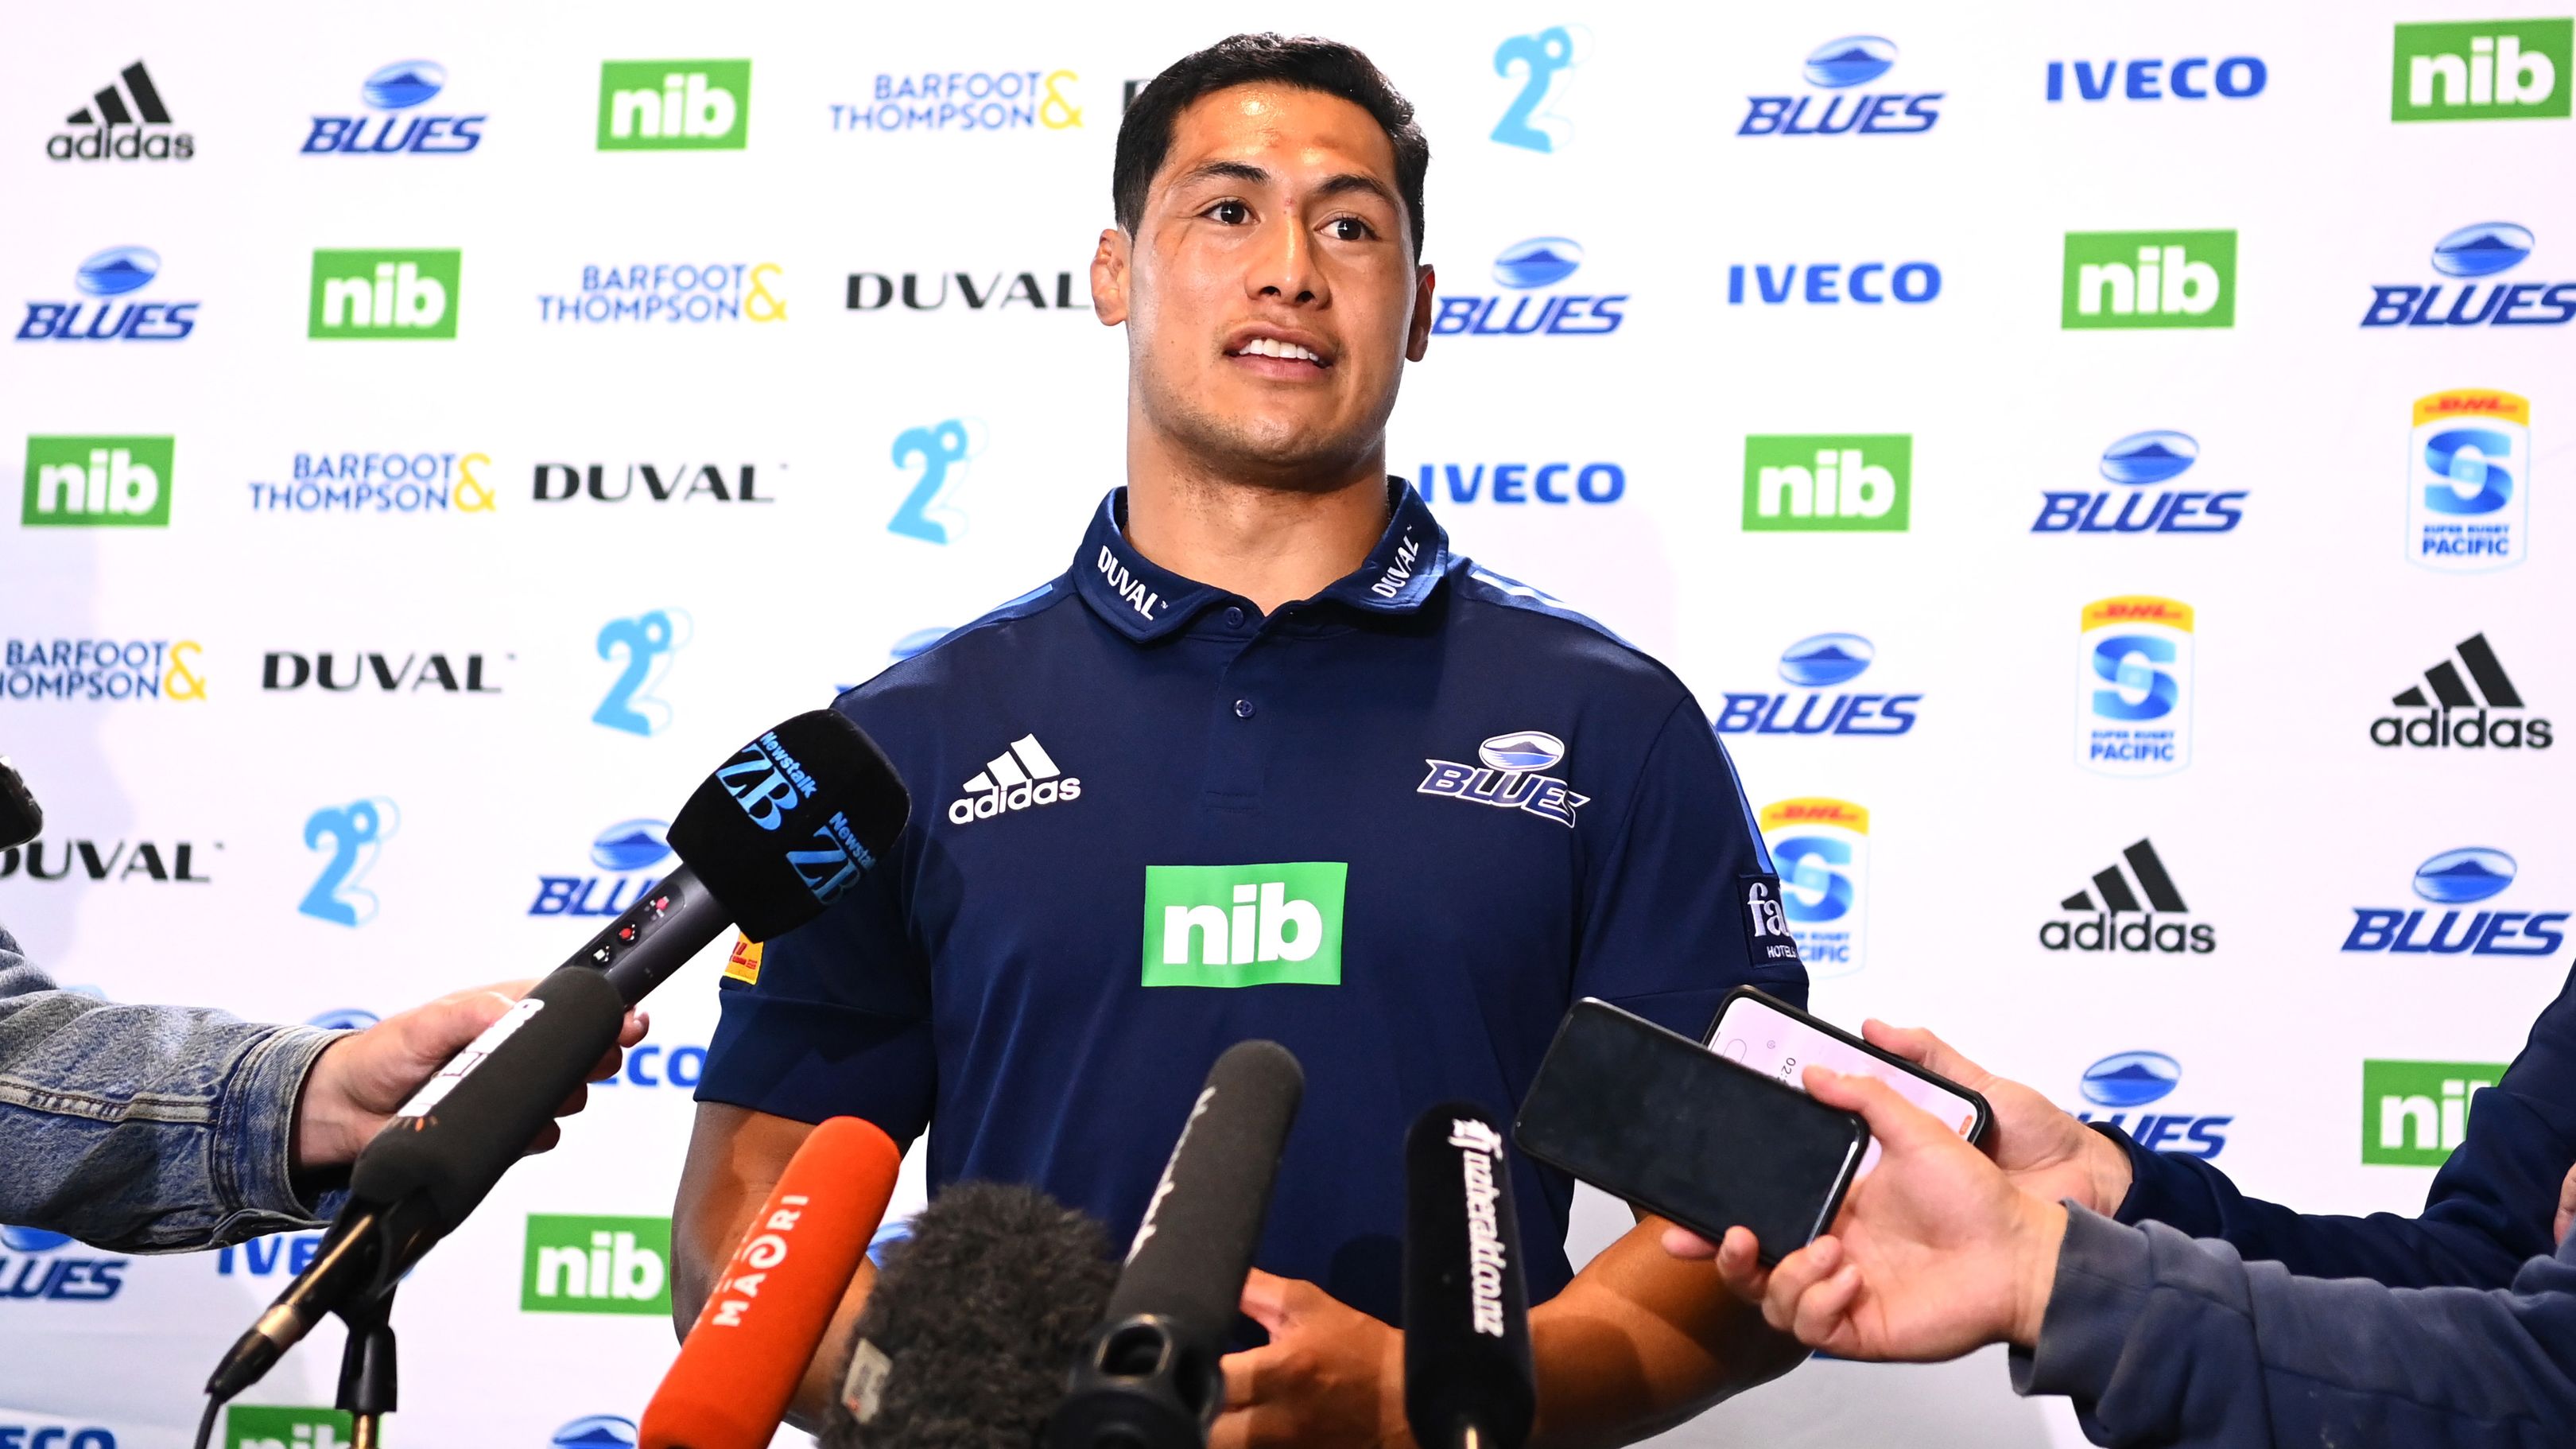 Roger Tuivasa-Sheck speaks to media following his decision to depart the Blues for the Warriors.